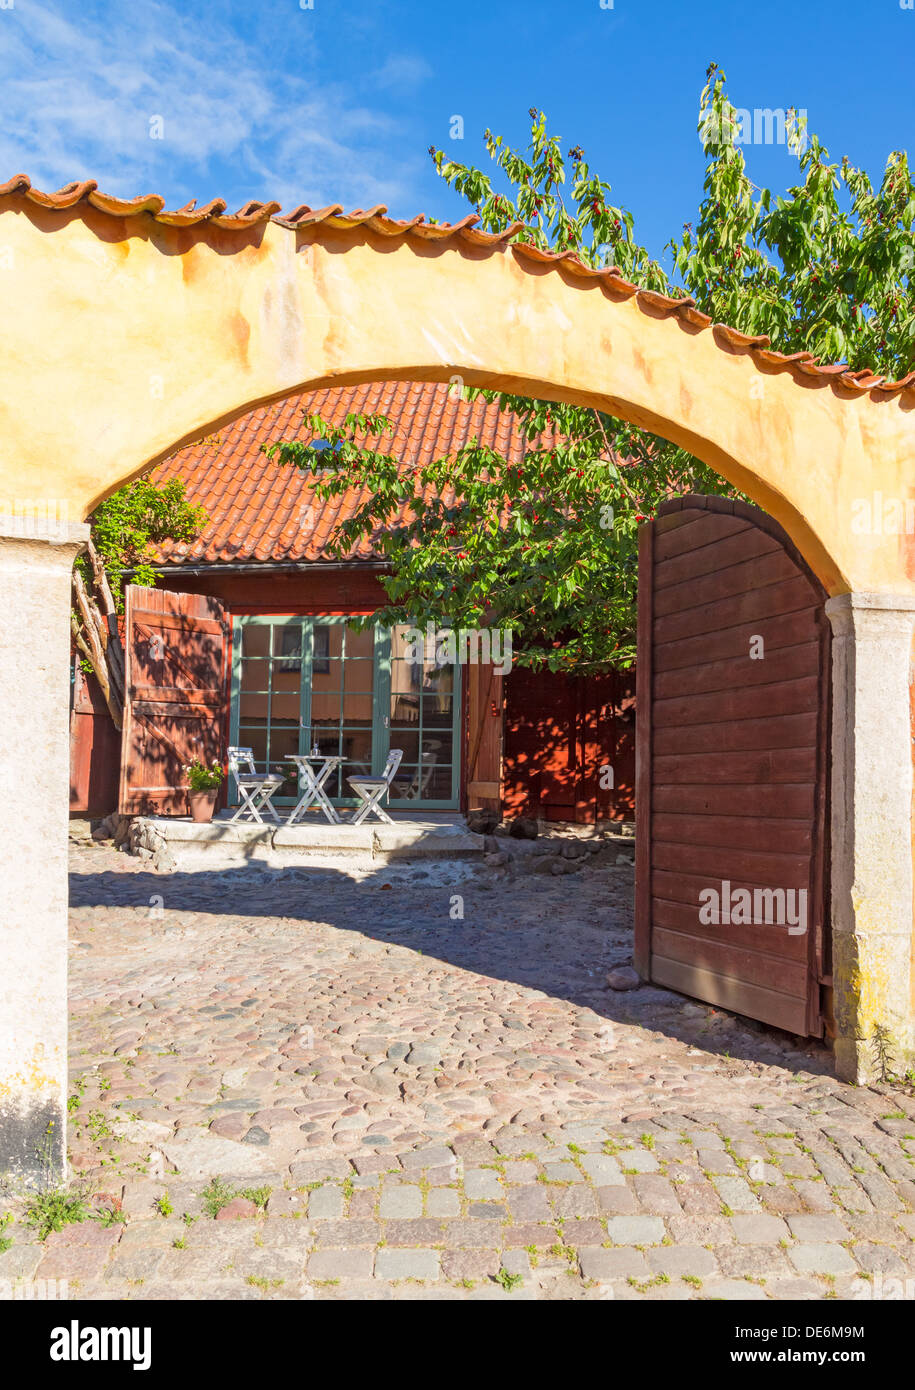 Colorful patio in Visby, a medieval town on the island of Gotland, Sweden. Stock Photo